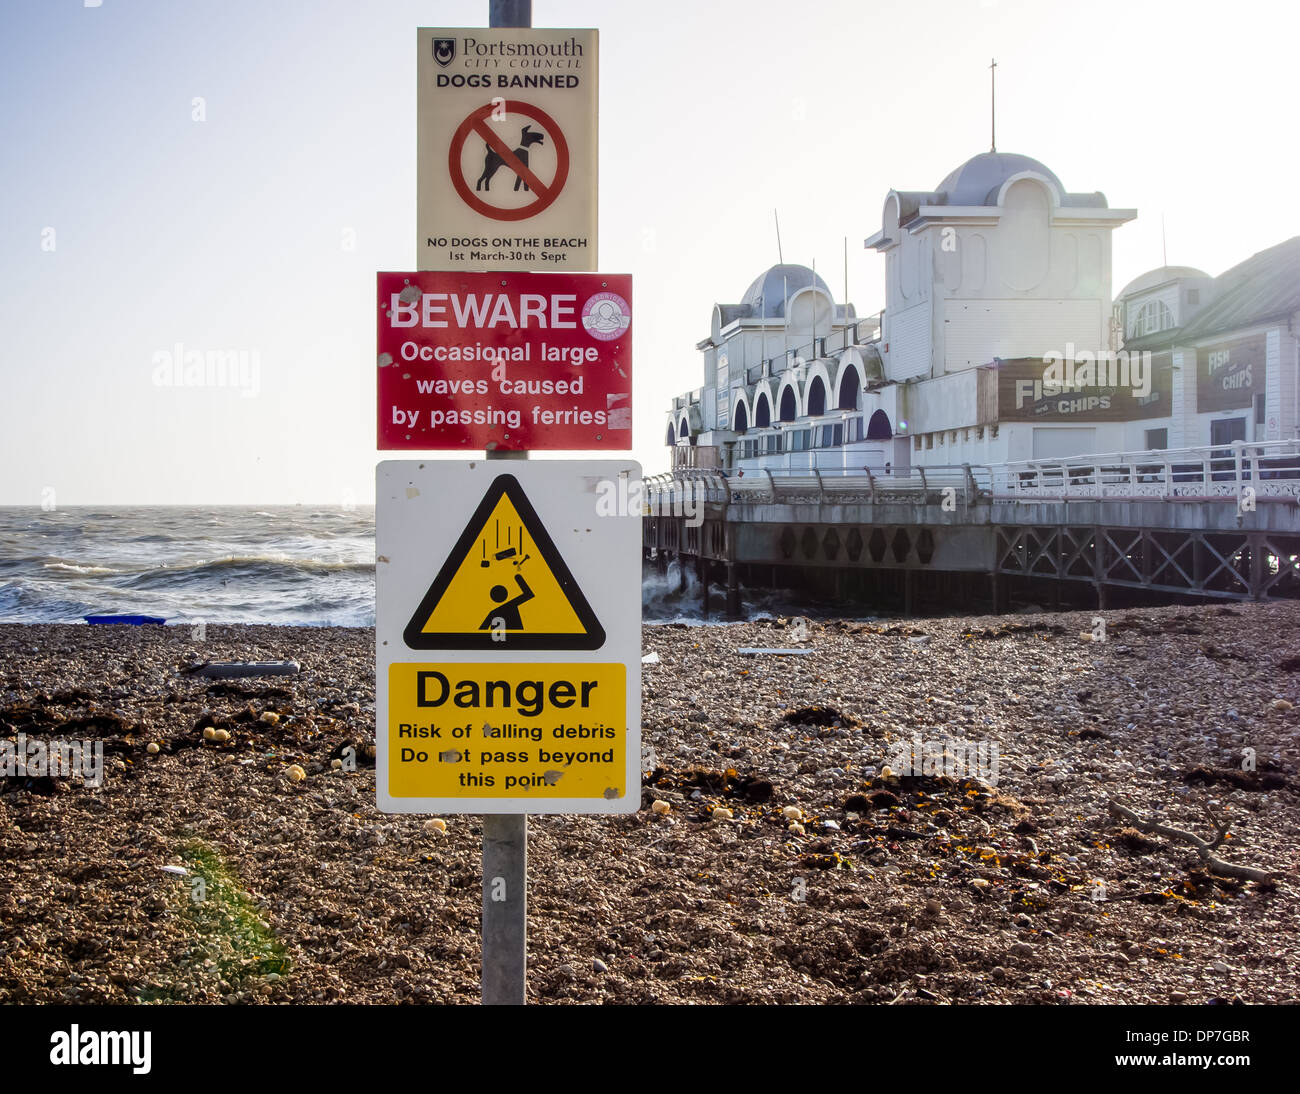 signs warning of dangers on the beach as well as declaring Dogs being banned beside South Parade Pier in Southsea Portsmouth Stock Photo